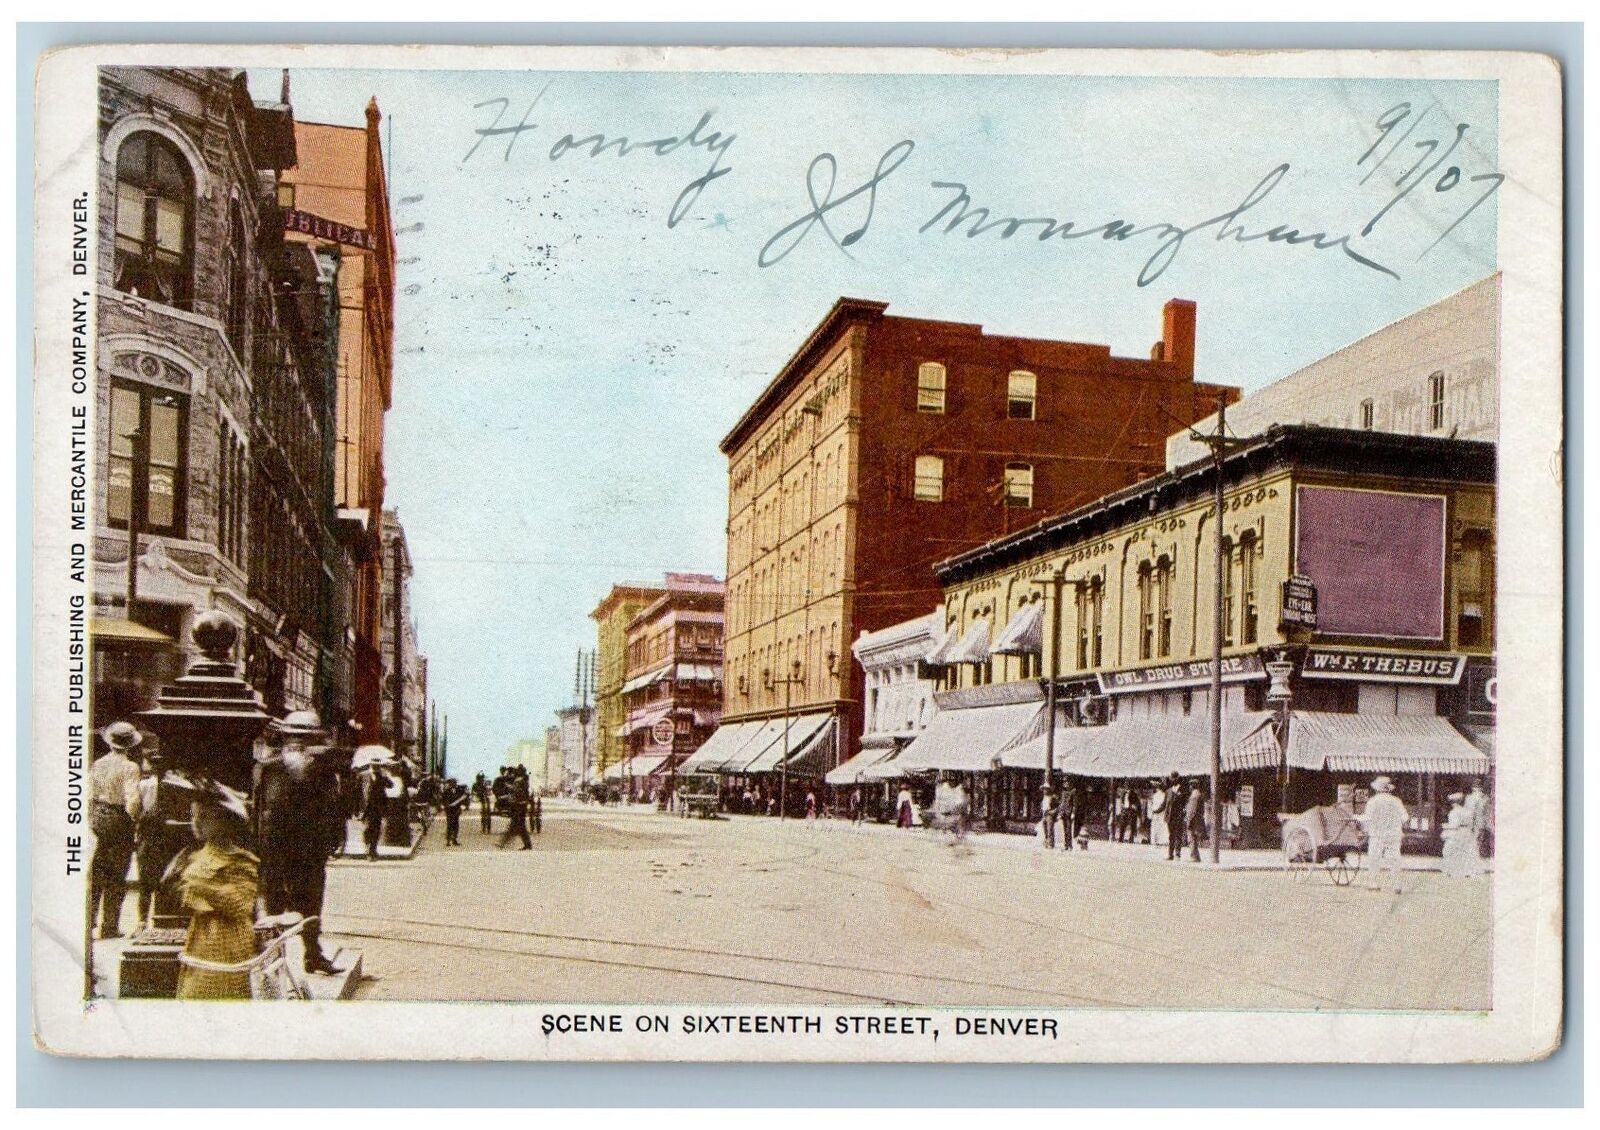 Denver Colorado CO Postcard Scene On Sixteenth Street View 1907 Business Section